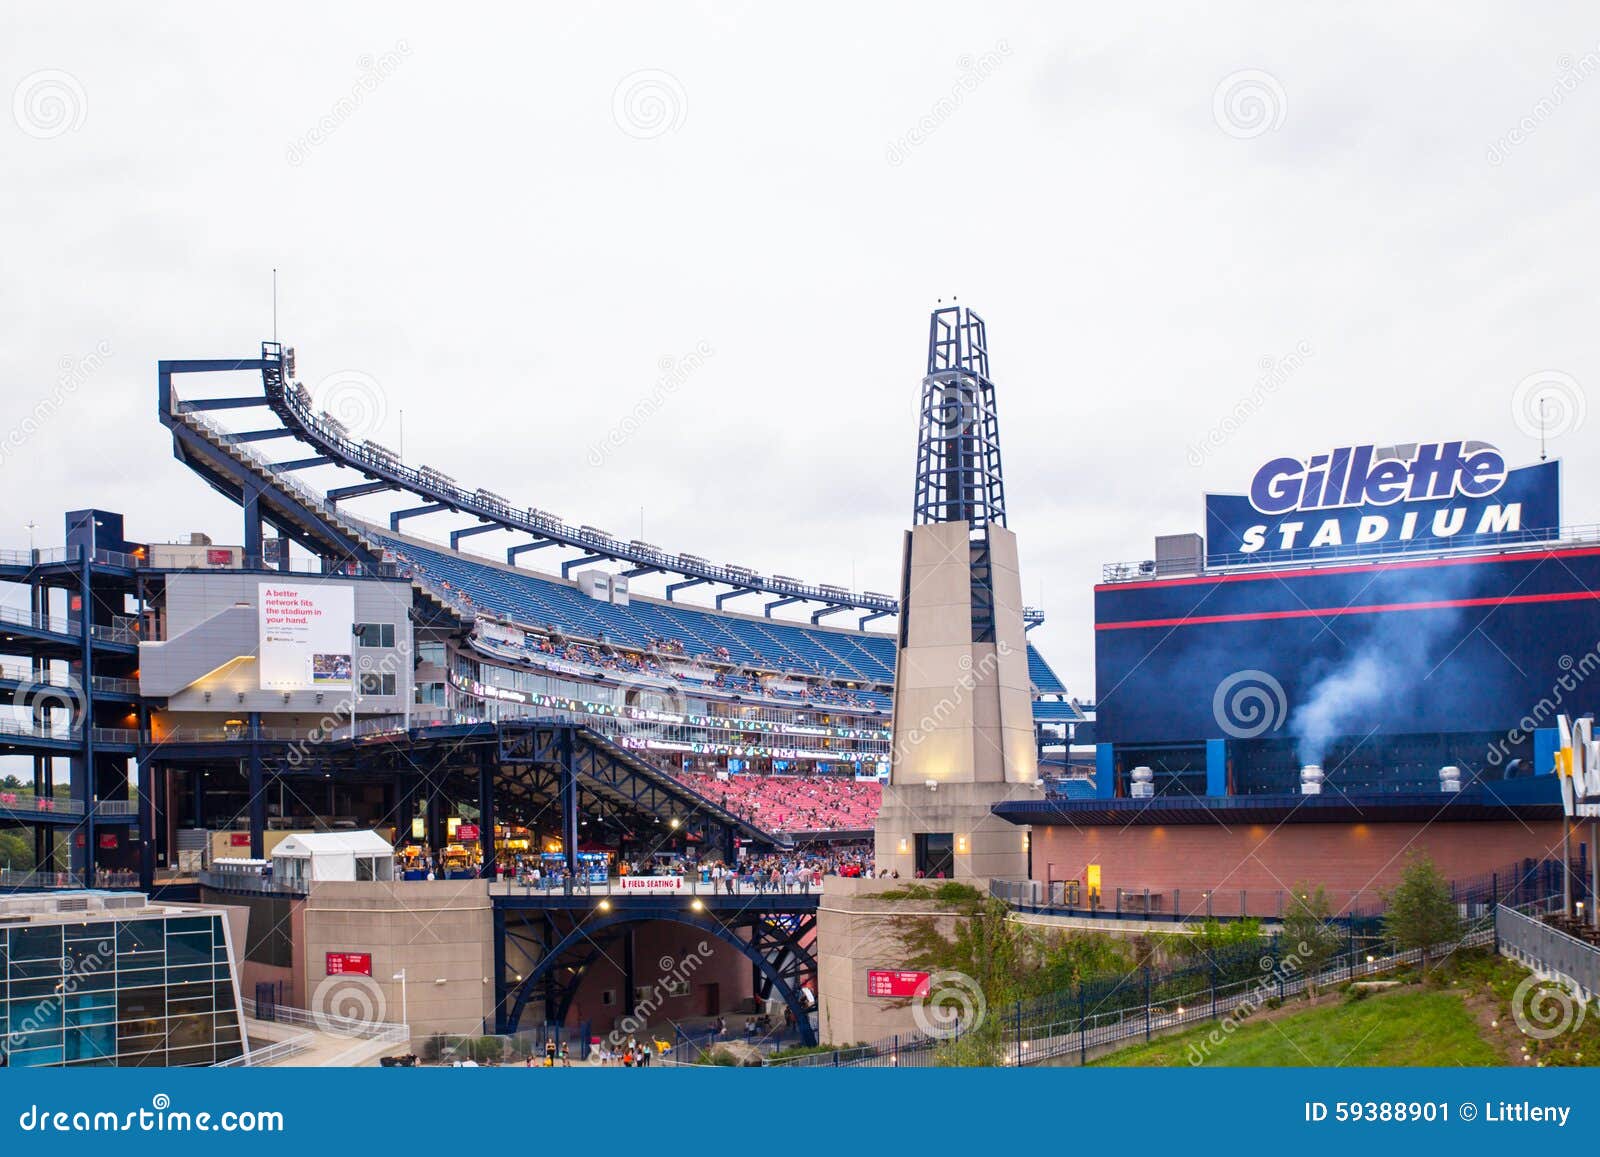 Gillette Stadium Concert Seating Chart One Direction